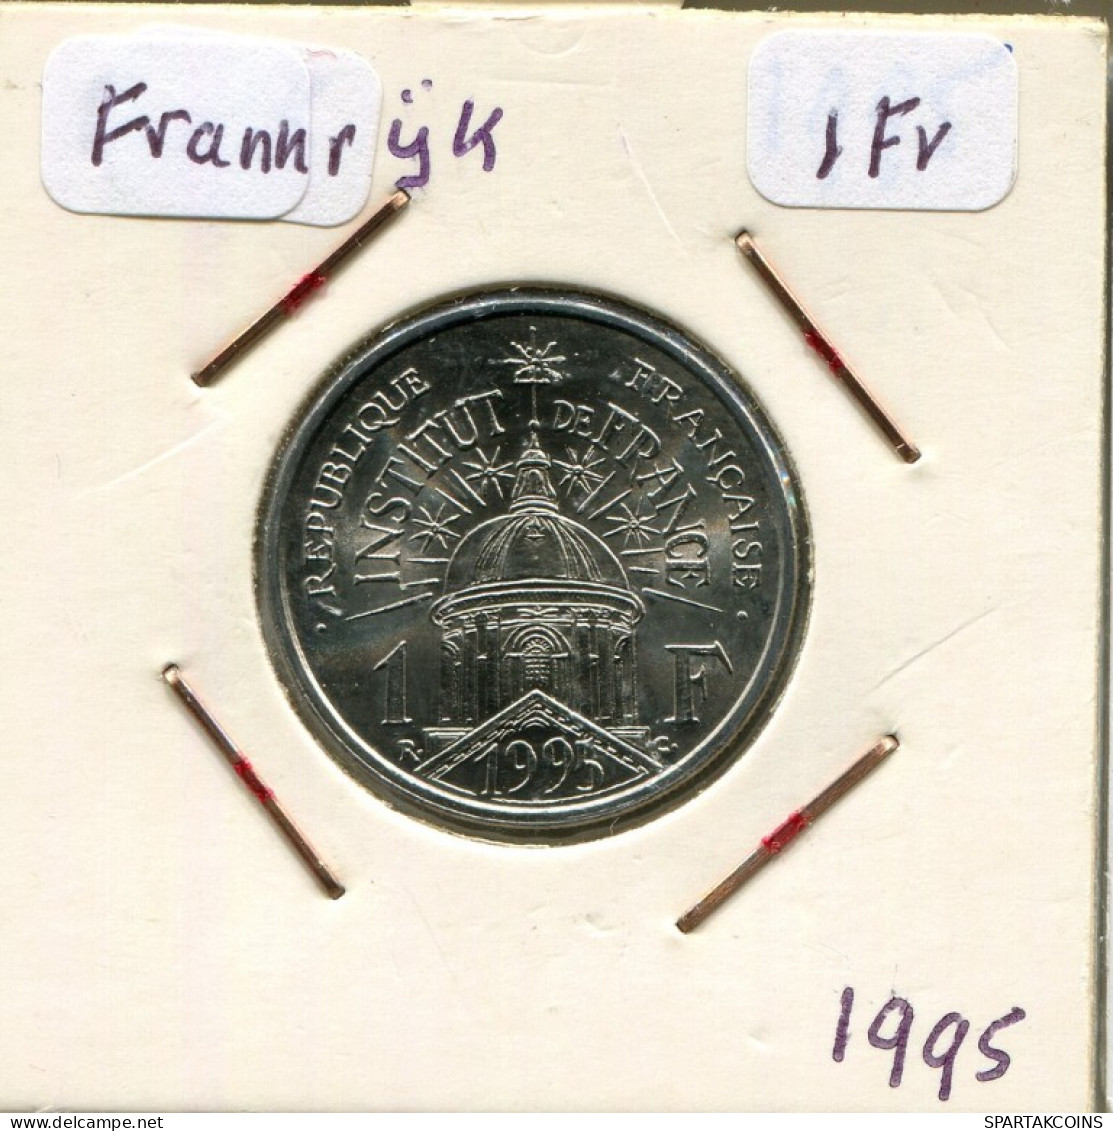 1 FRANC 1995 FRANCE Coin Coin 200th Anniversary Of Institute Of FRANCE Coin #AM583.E.A - 1 Franc